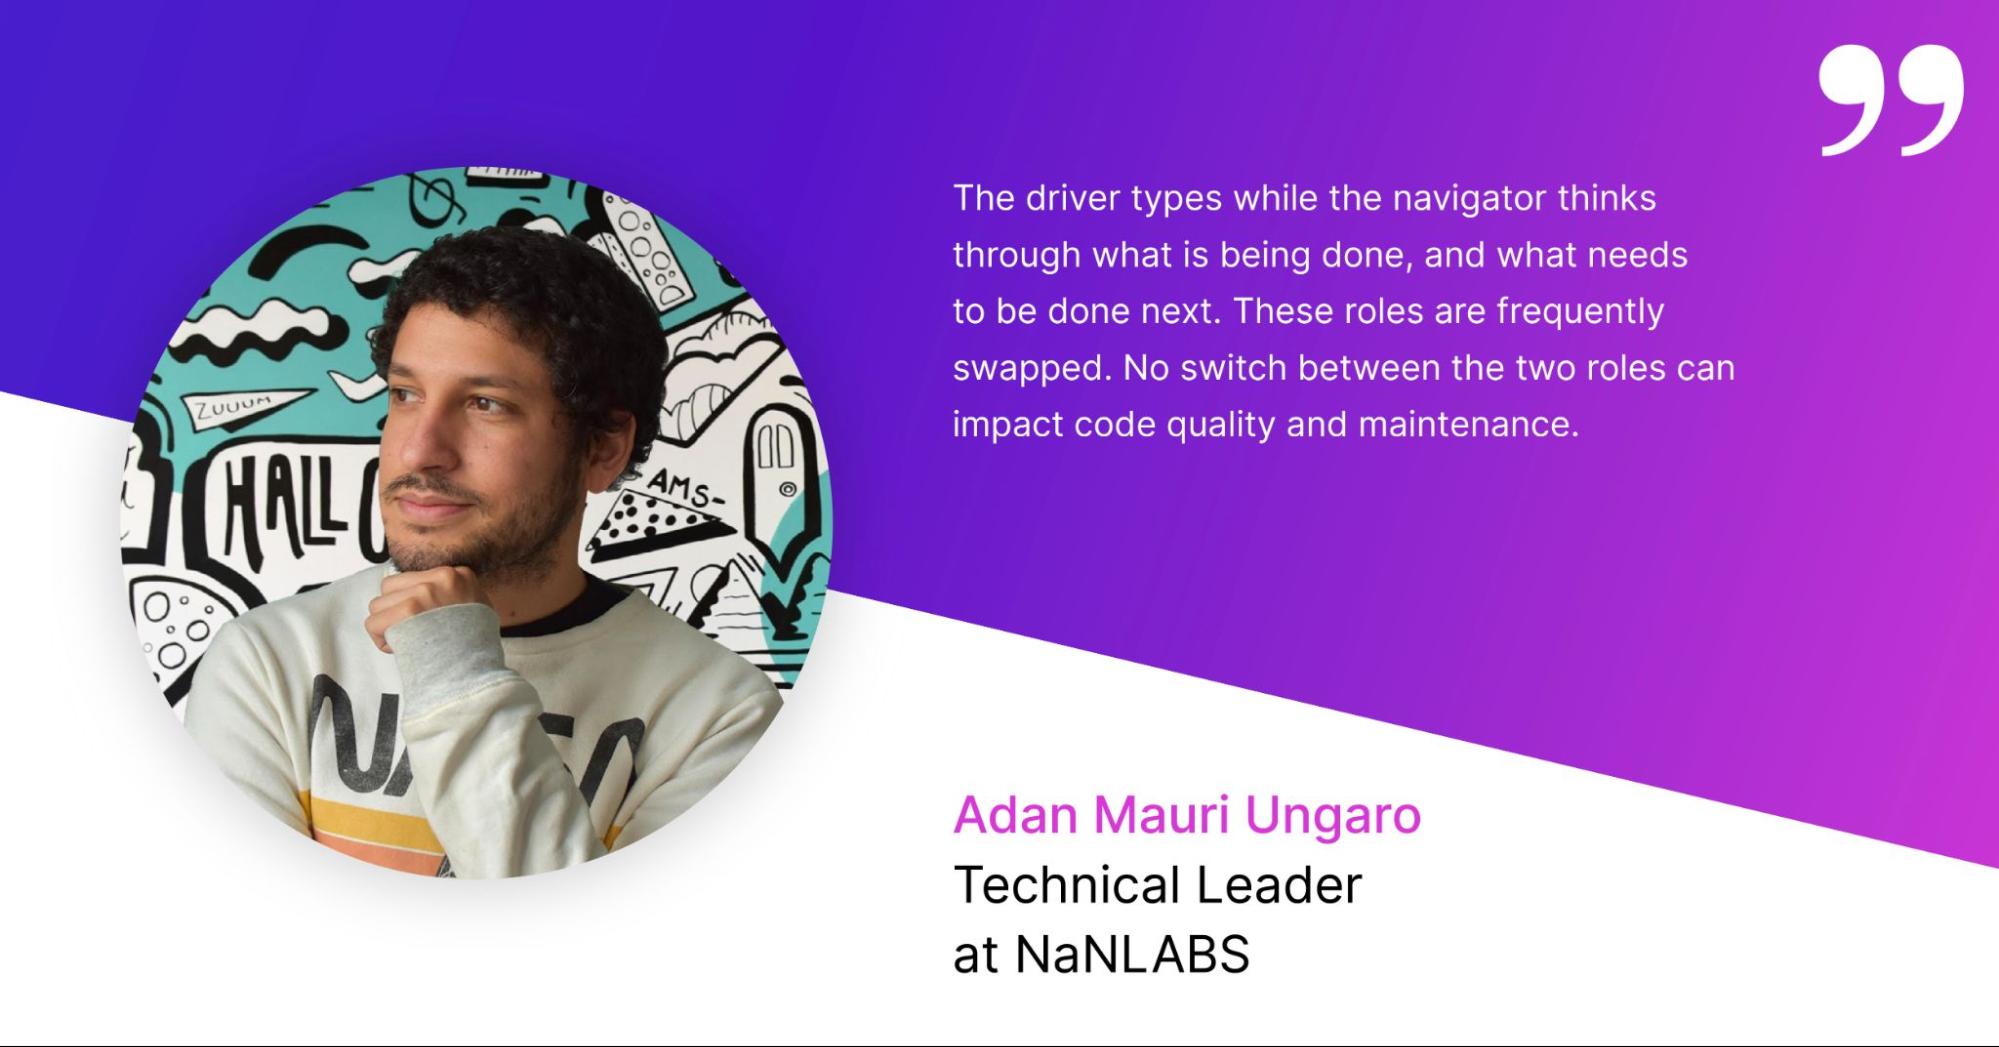 image9Guide to Agile technical practices - quote from Adan Mauri Ungaro, Technical Leader at NaNLABS, about pair programming